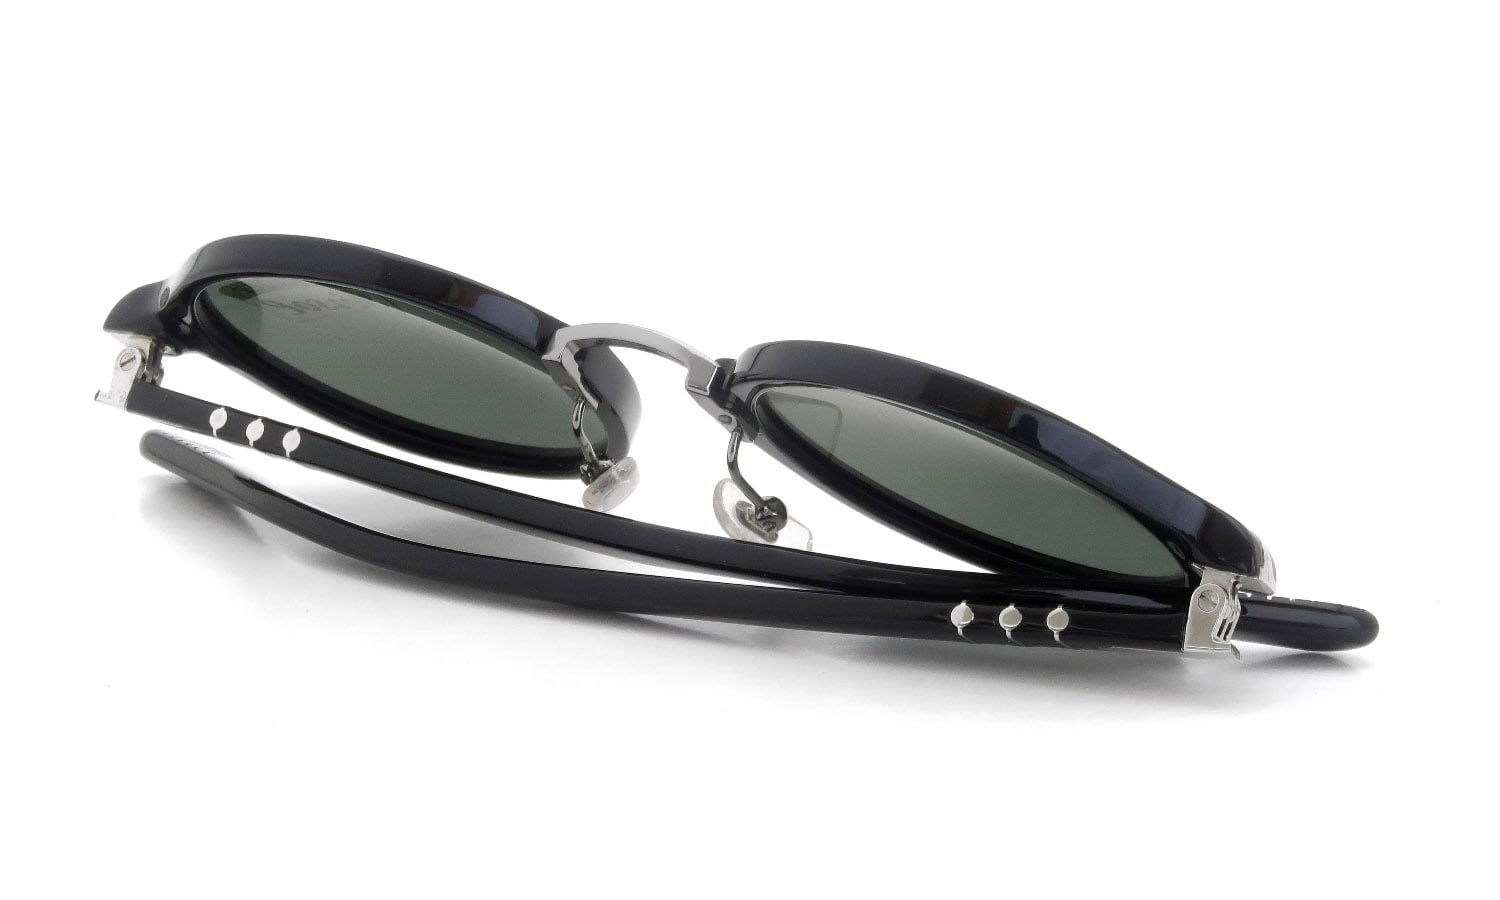 Persol 3129-S 95/58 48size